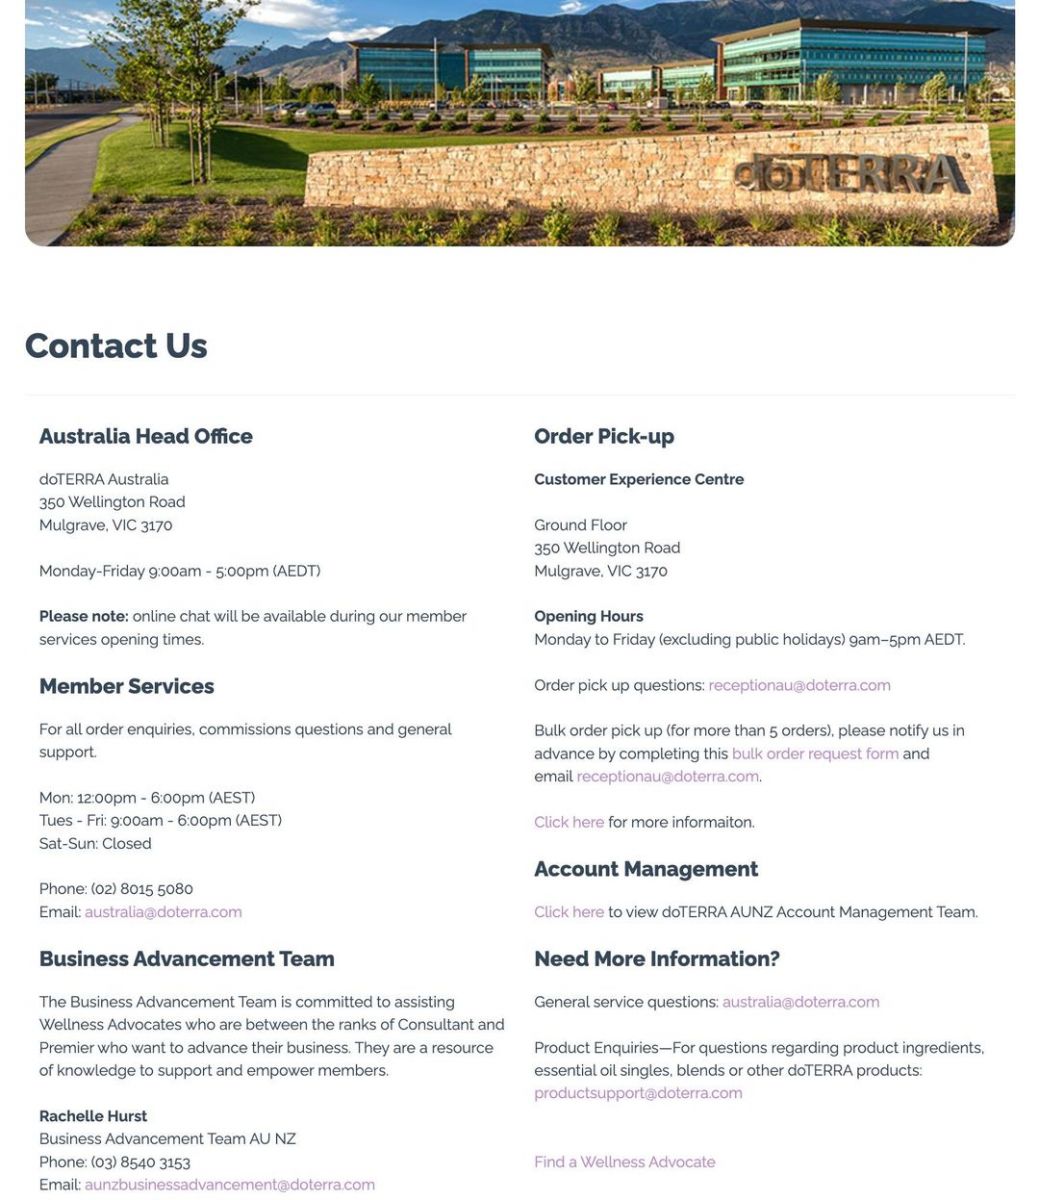 doTERRA Austrlia Member Services contact, phone number, email 